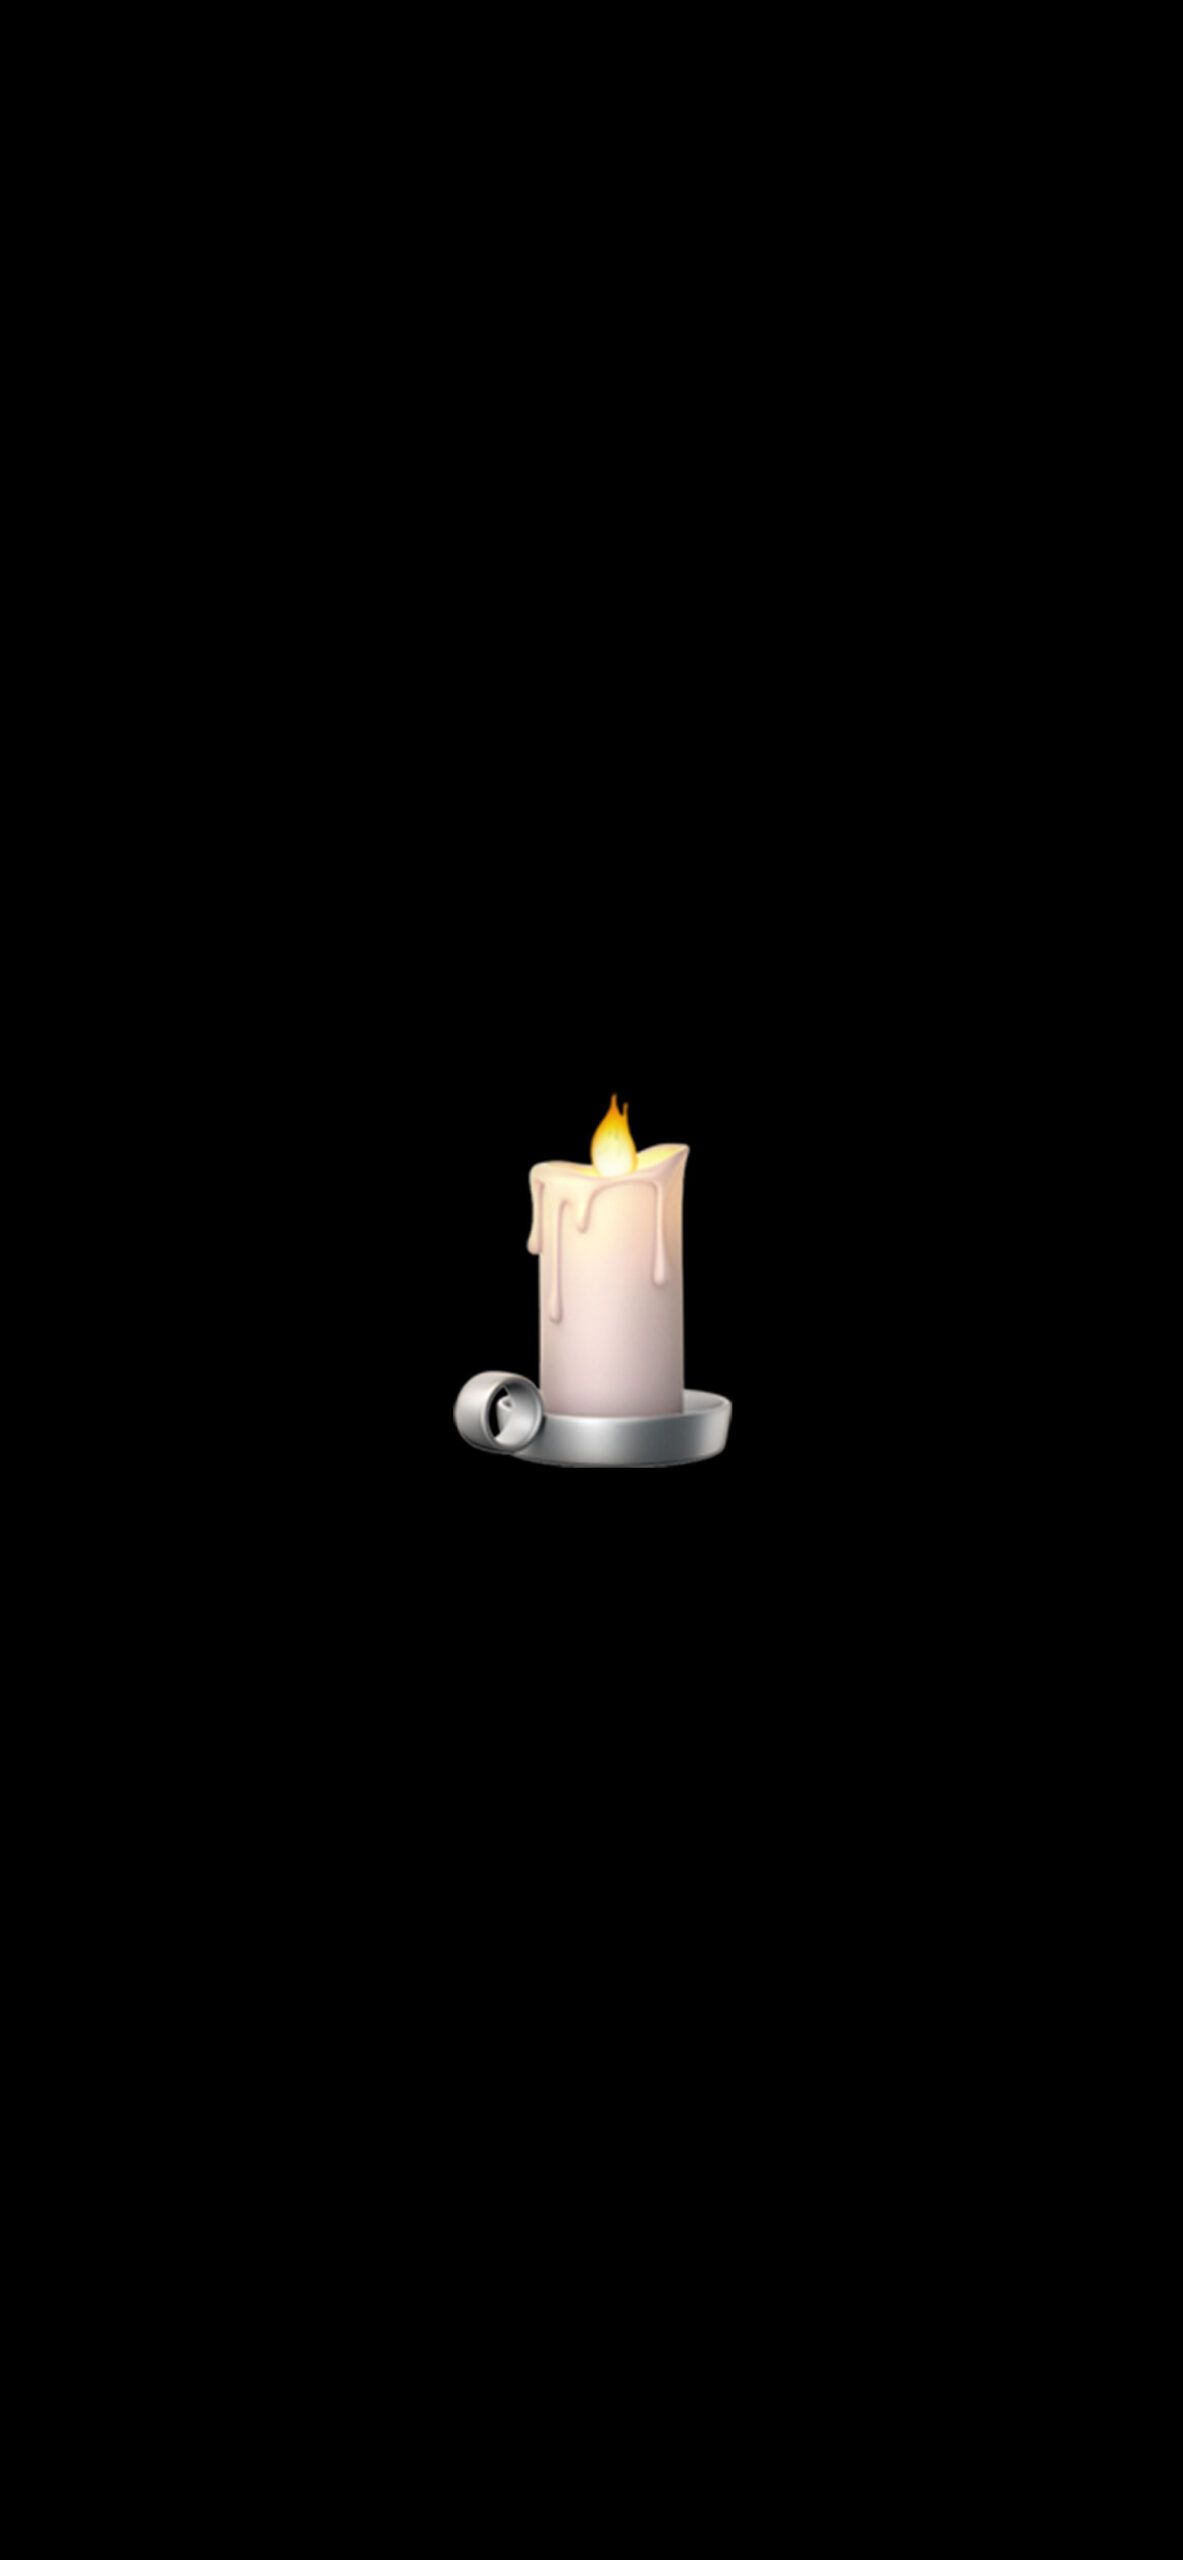 Minimalist Emoji Wallpaper with Ghost, Candle & Castle